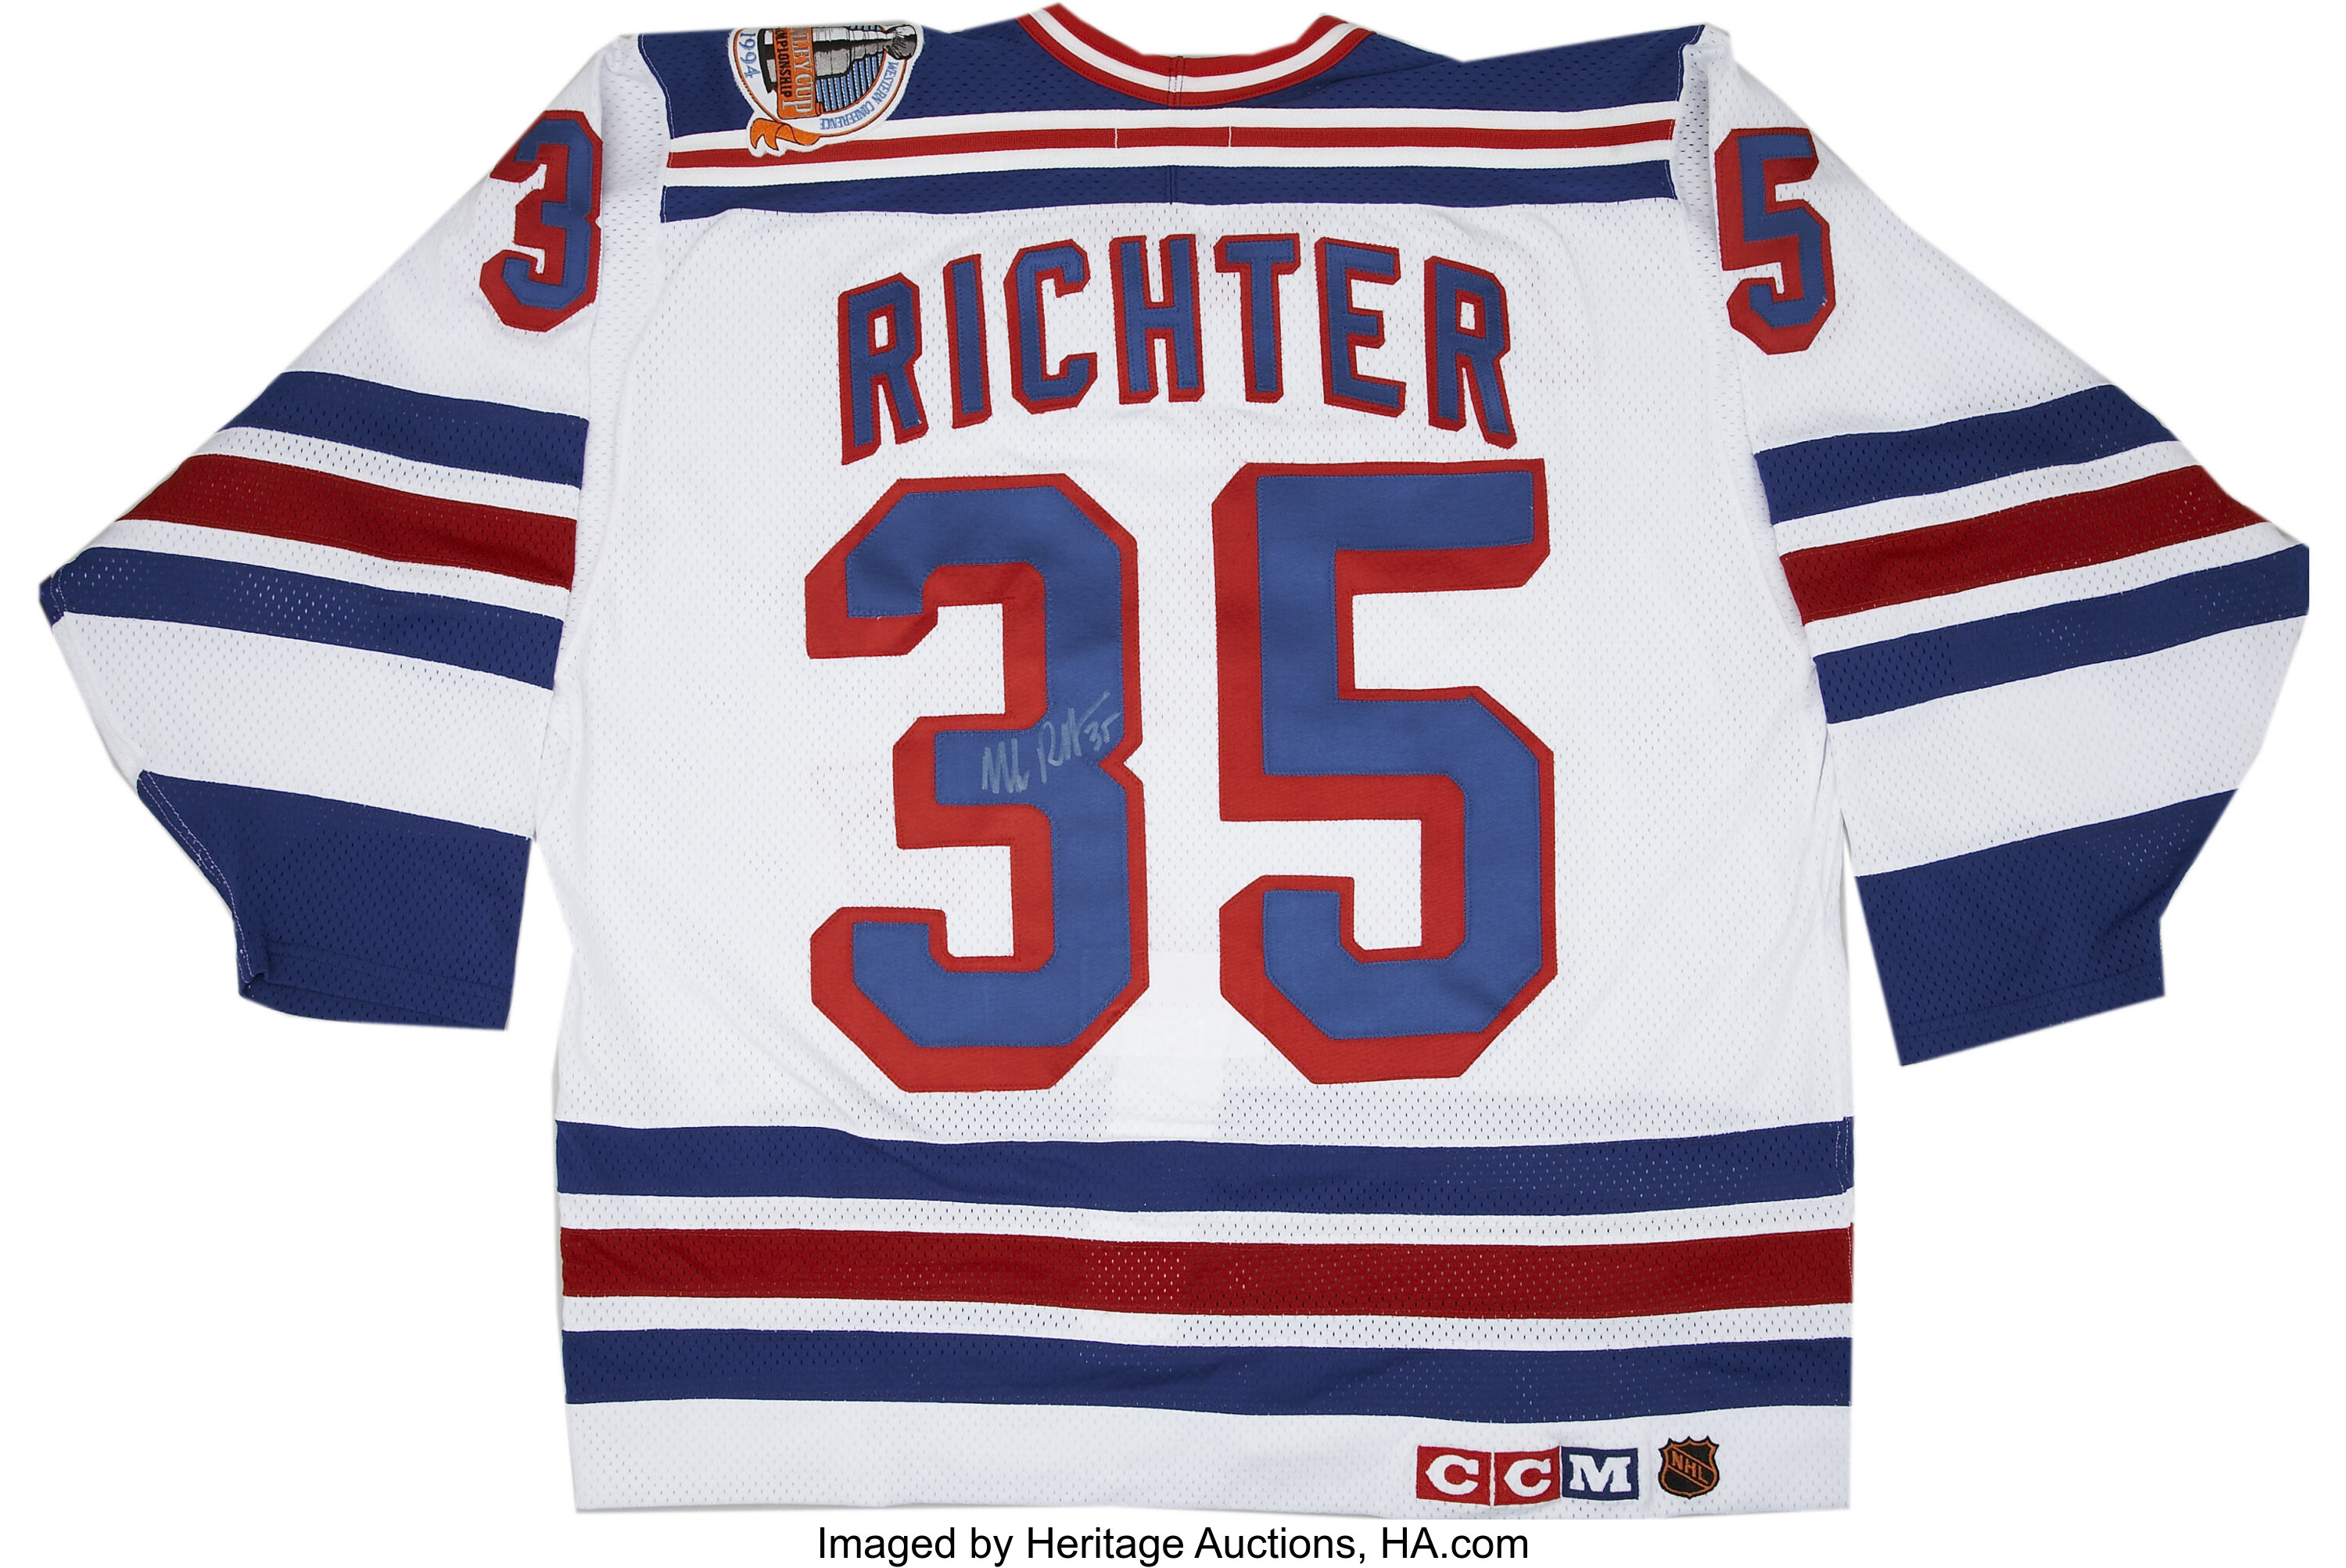 Mike Richter Team USA Autographed Olympic Nike Hockey Jersey *New